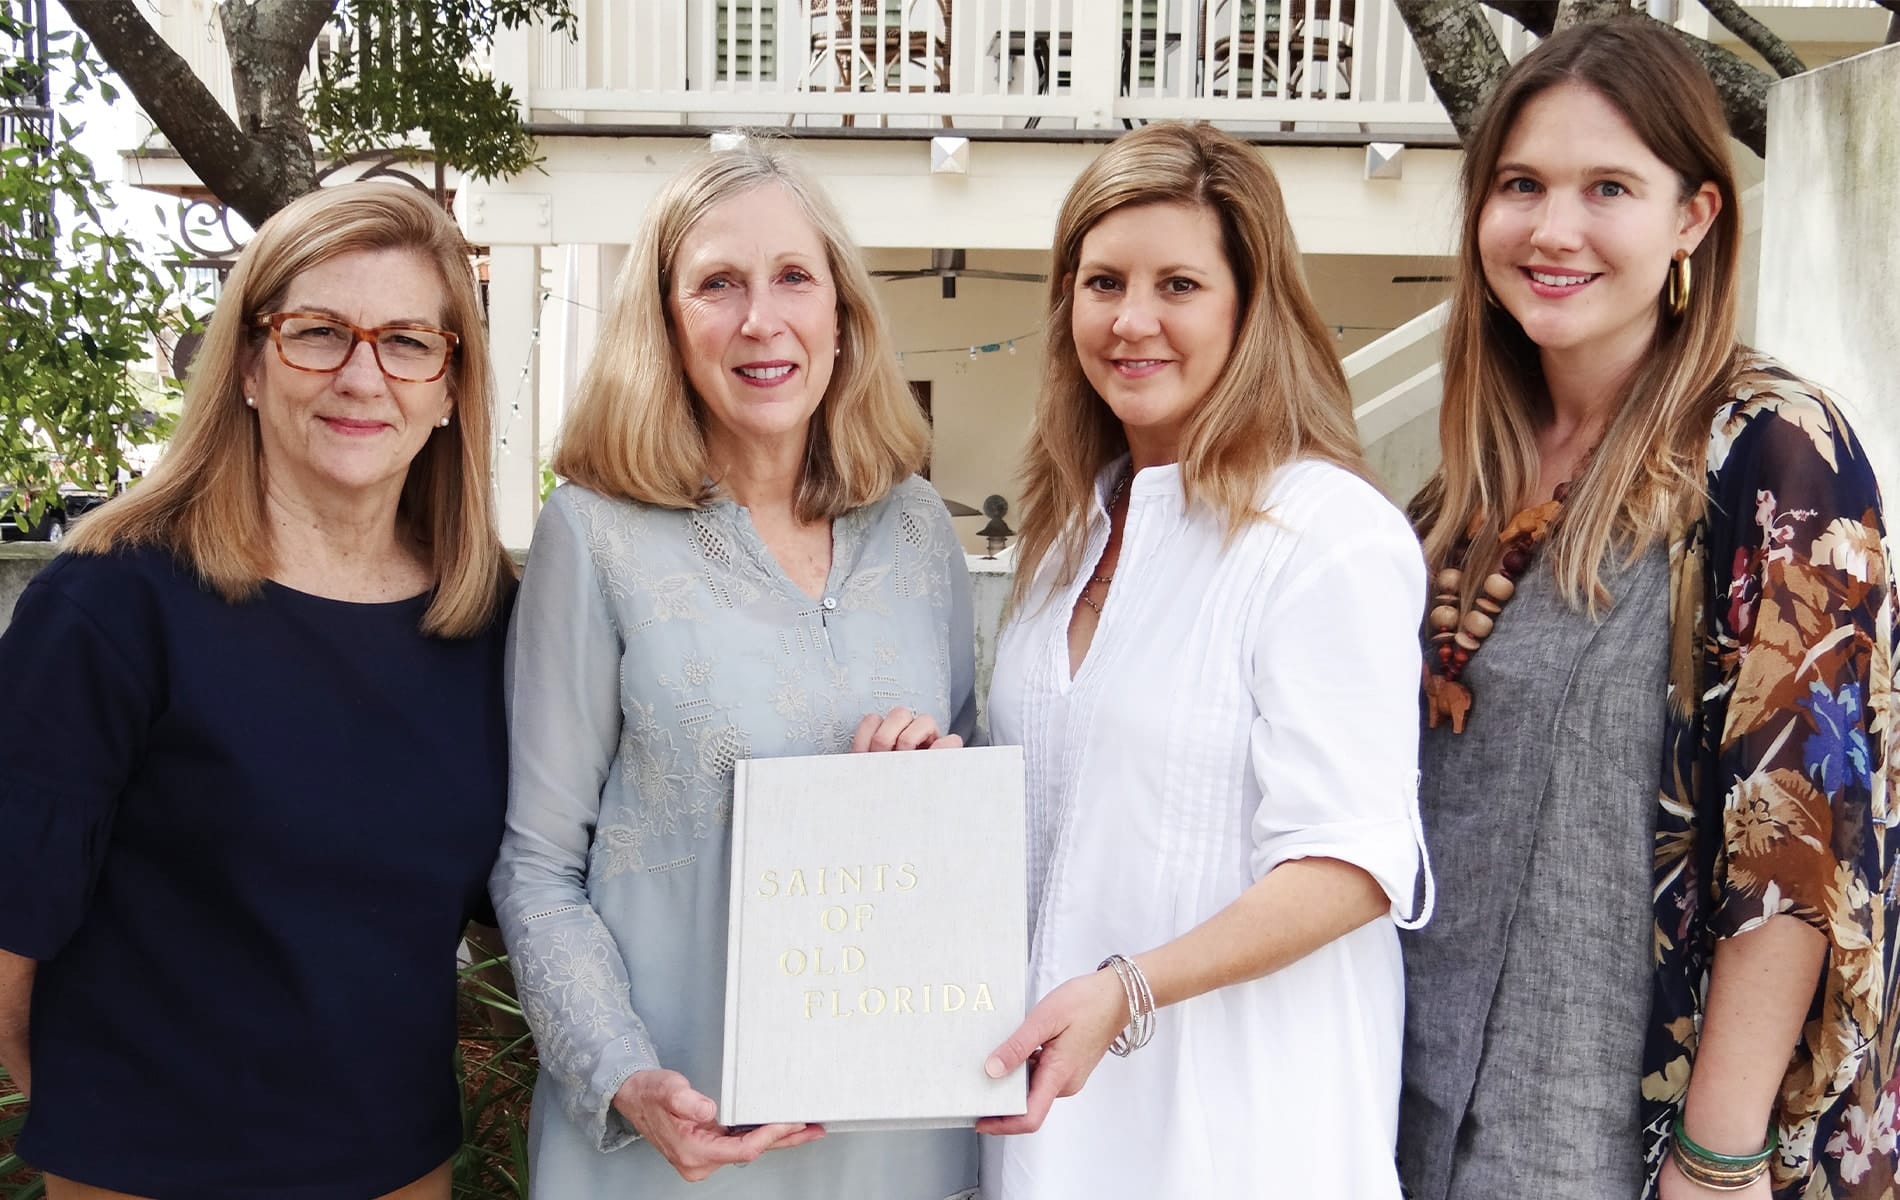 Diane Brady (second from left) and Saints of Old Florida authors Christina McDermott, Melissa Farrell, and Emily Raffield holding the Saints of Old Florida book at the 2017 Rosemary Beach Girls Getaway.